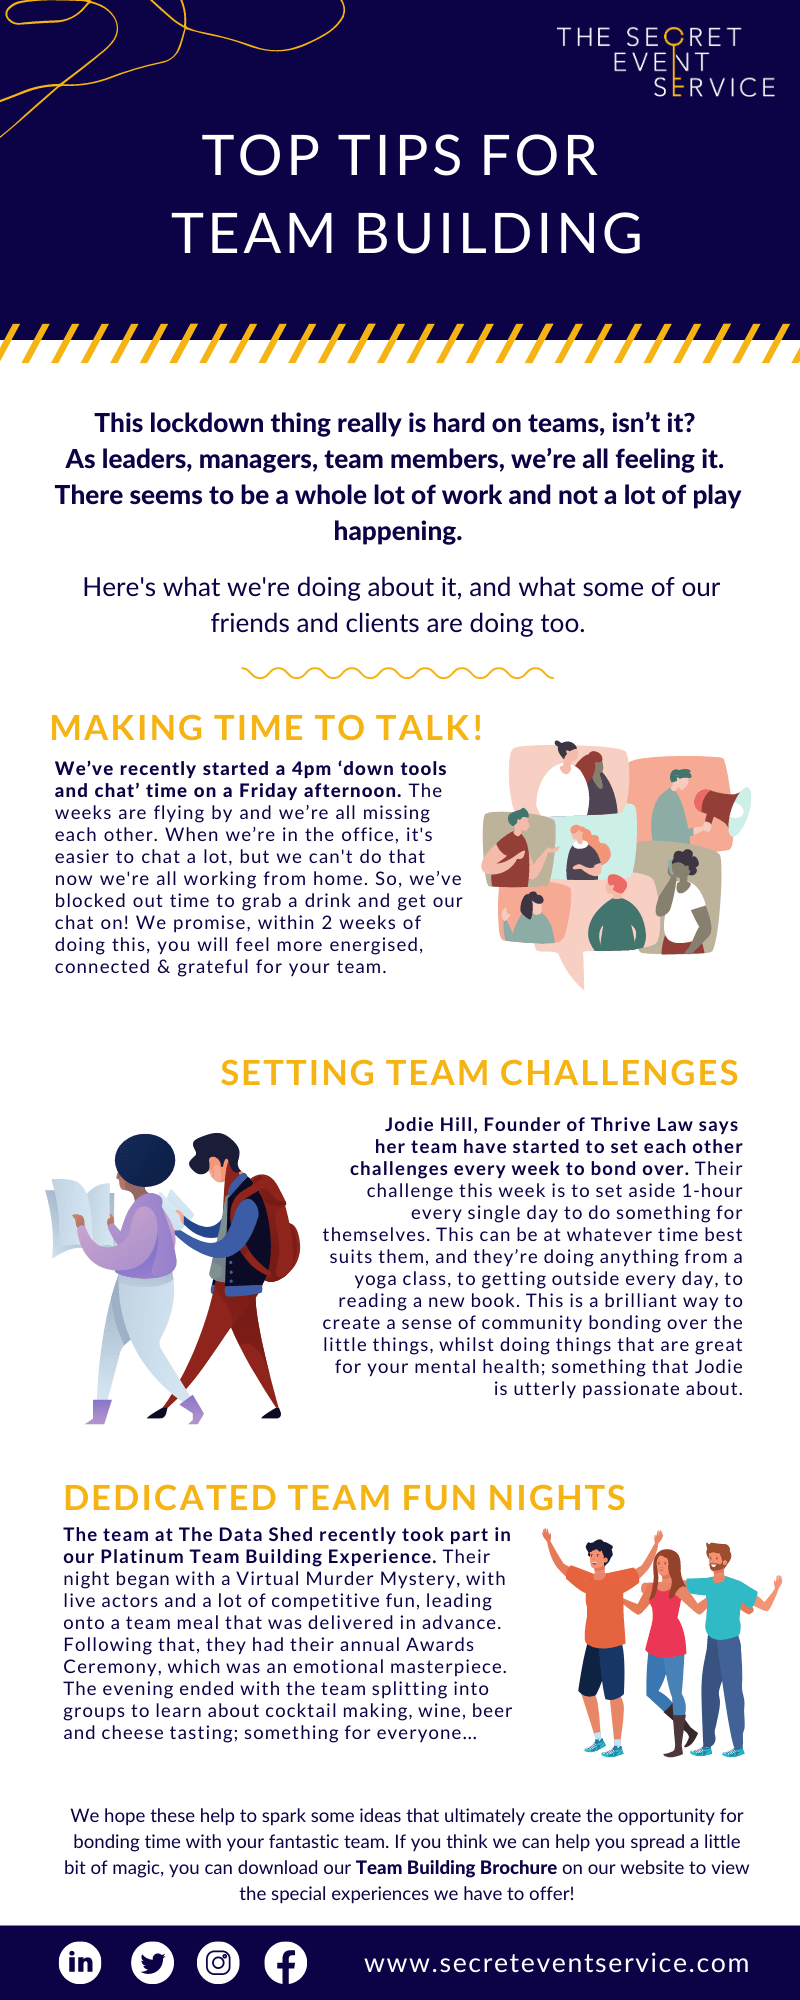 Top Tips for Team Building